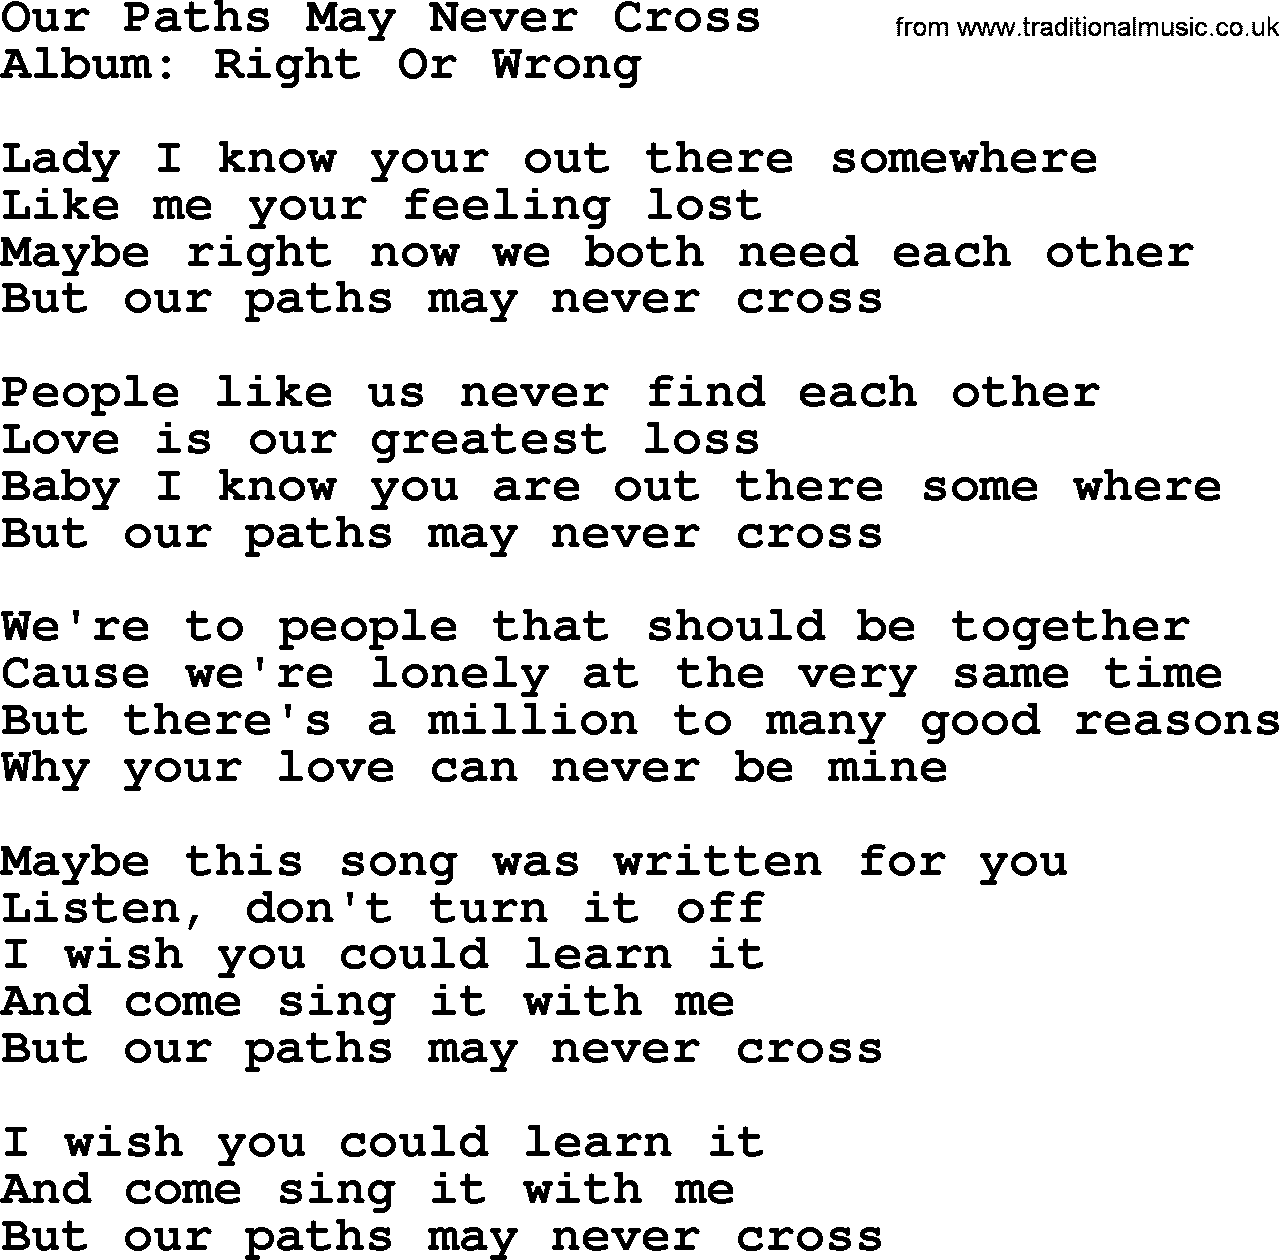 George Strait song: Our Paths May Never Cross, lyrics